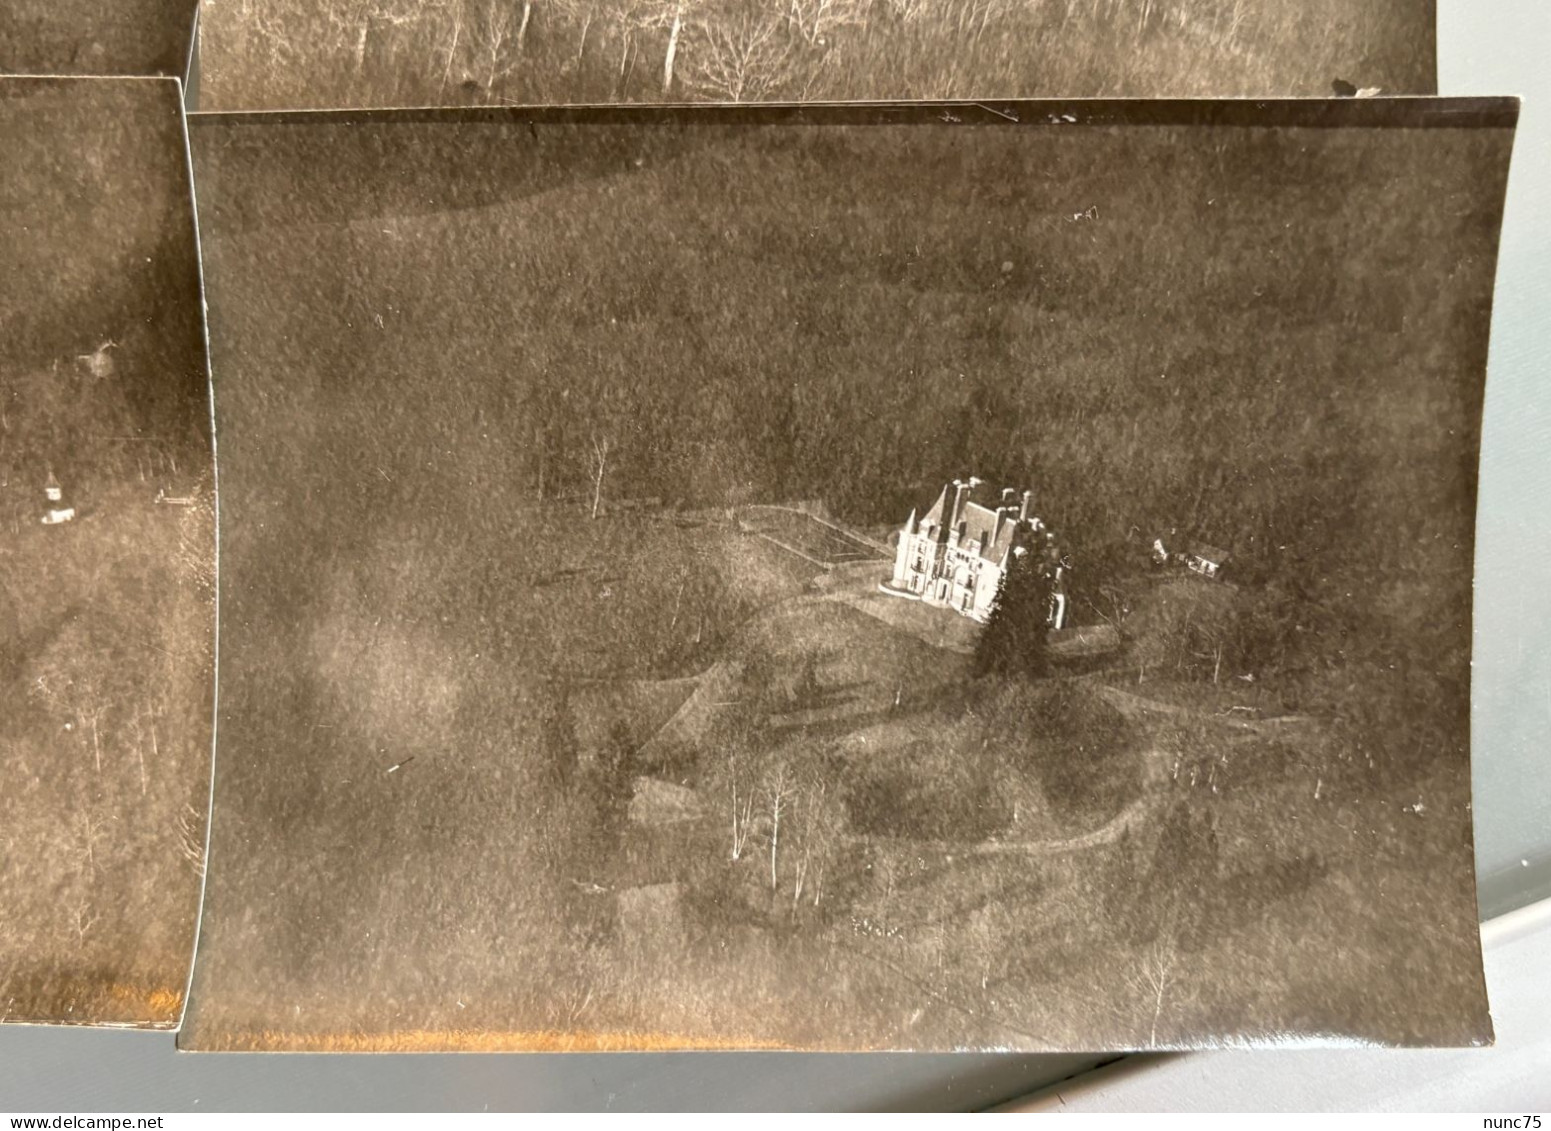 GENGOULT Aerodrome Toul VUES AERIENNES US Army AEF 3rd Photographic section avions Areal views Croix de Metz ww1 1919